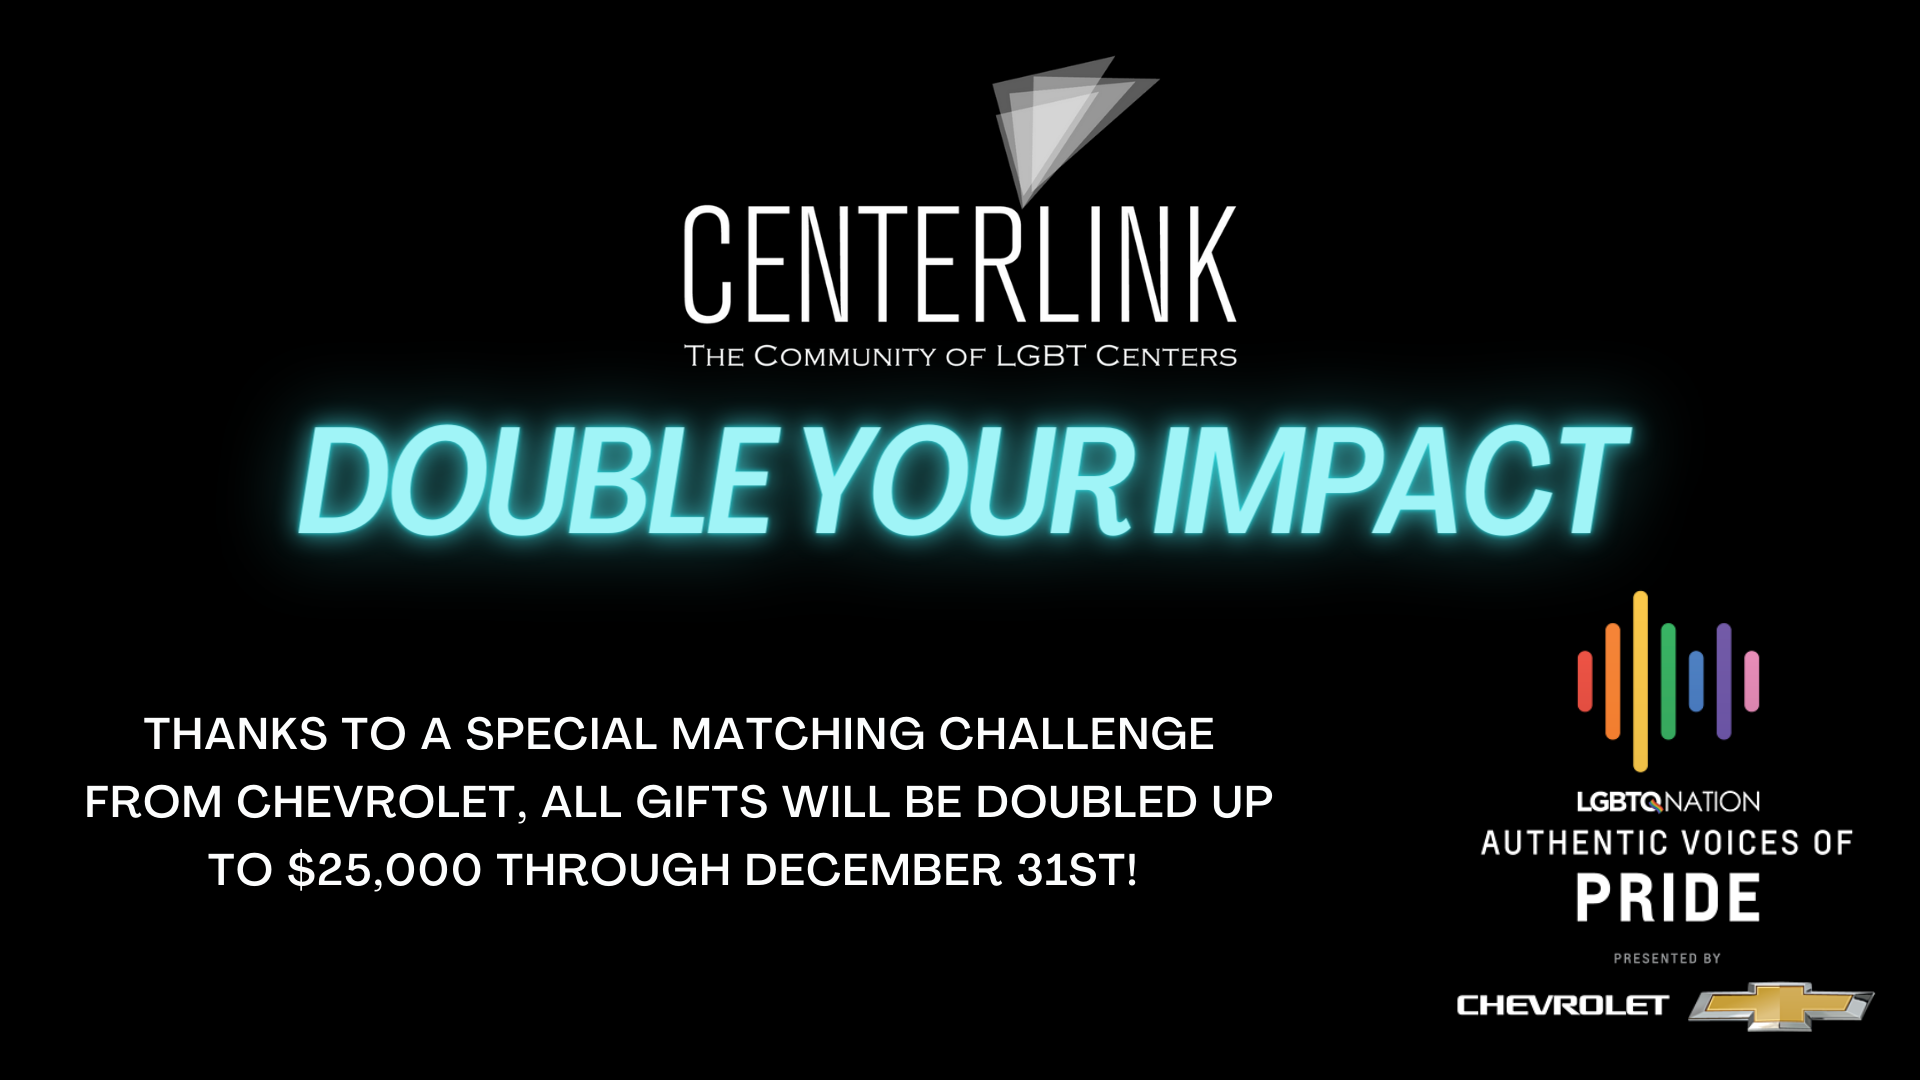 Donate Now | Help build a thriving center network that creates healthy, vibrant, and diverse communities. by CenterLink, The Community of LGBT Centers (givelively.org)